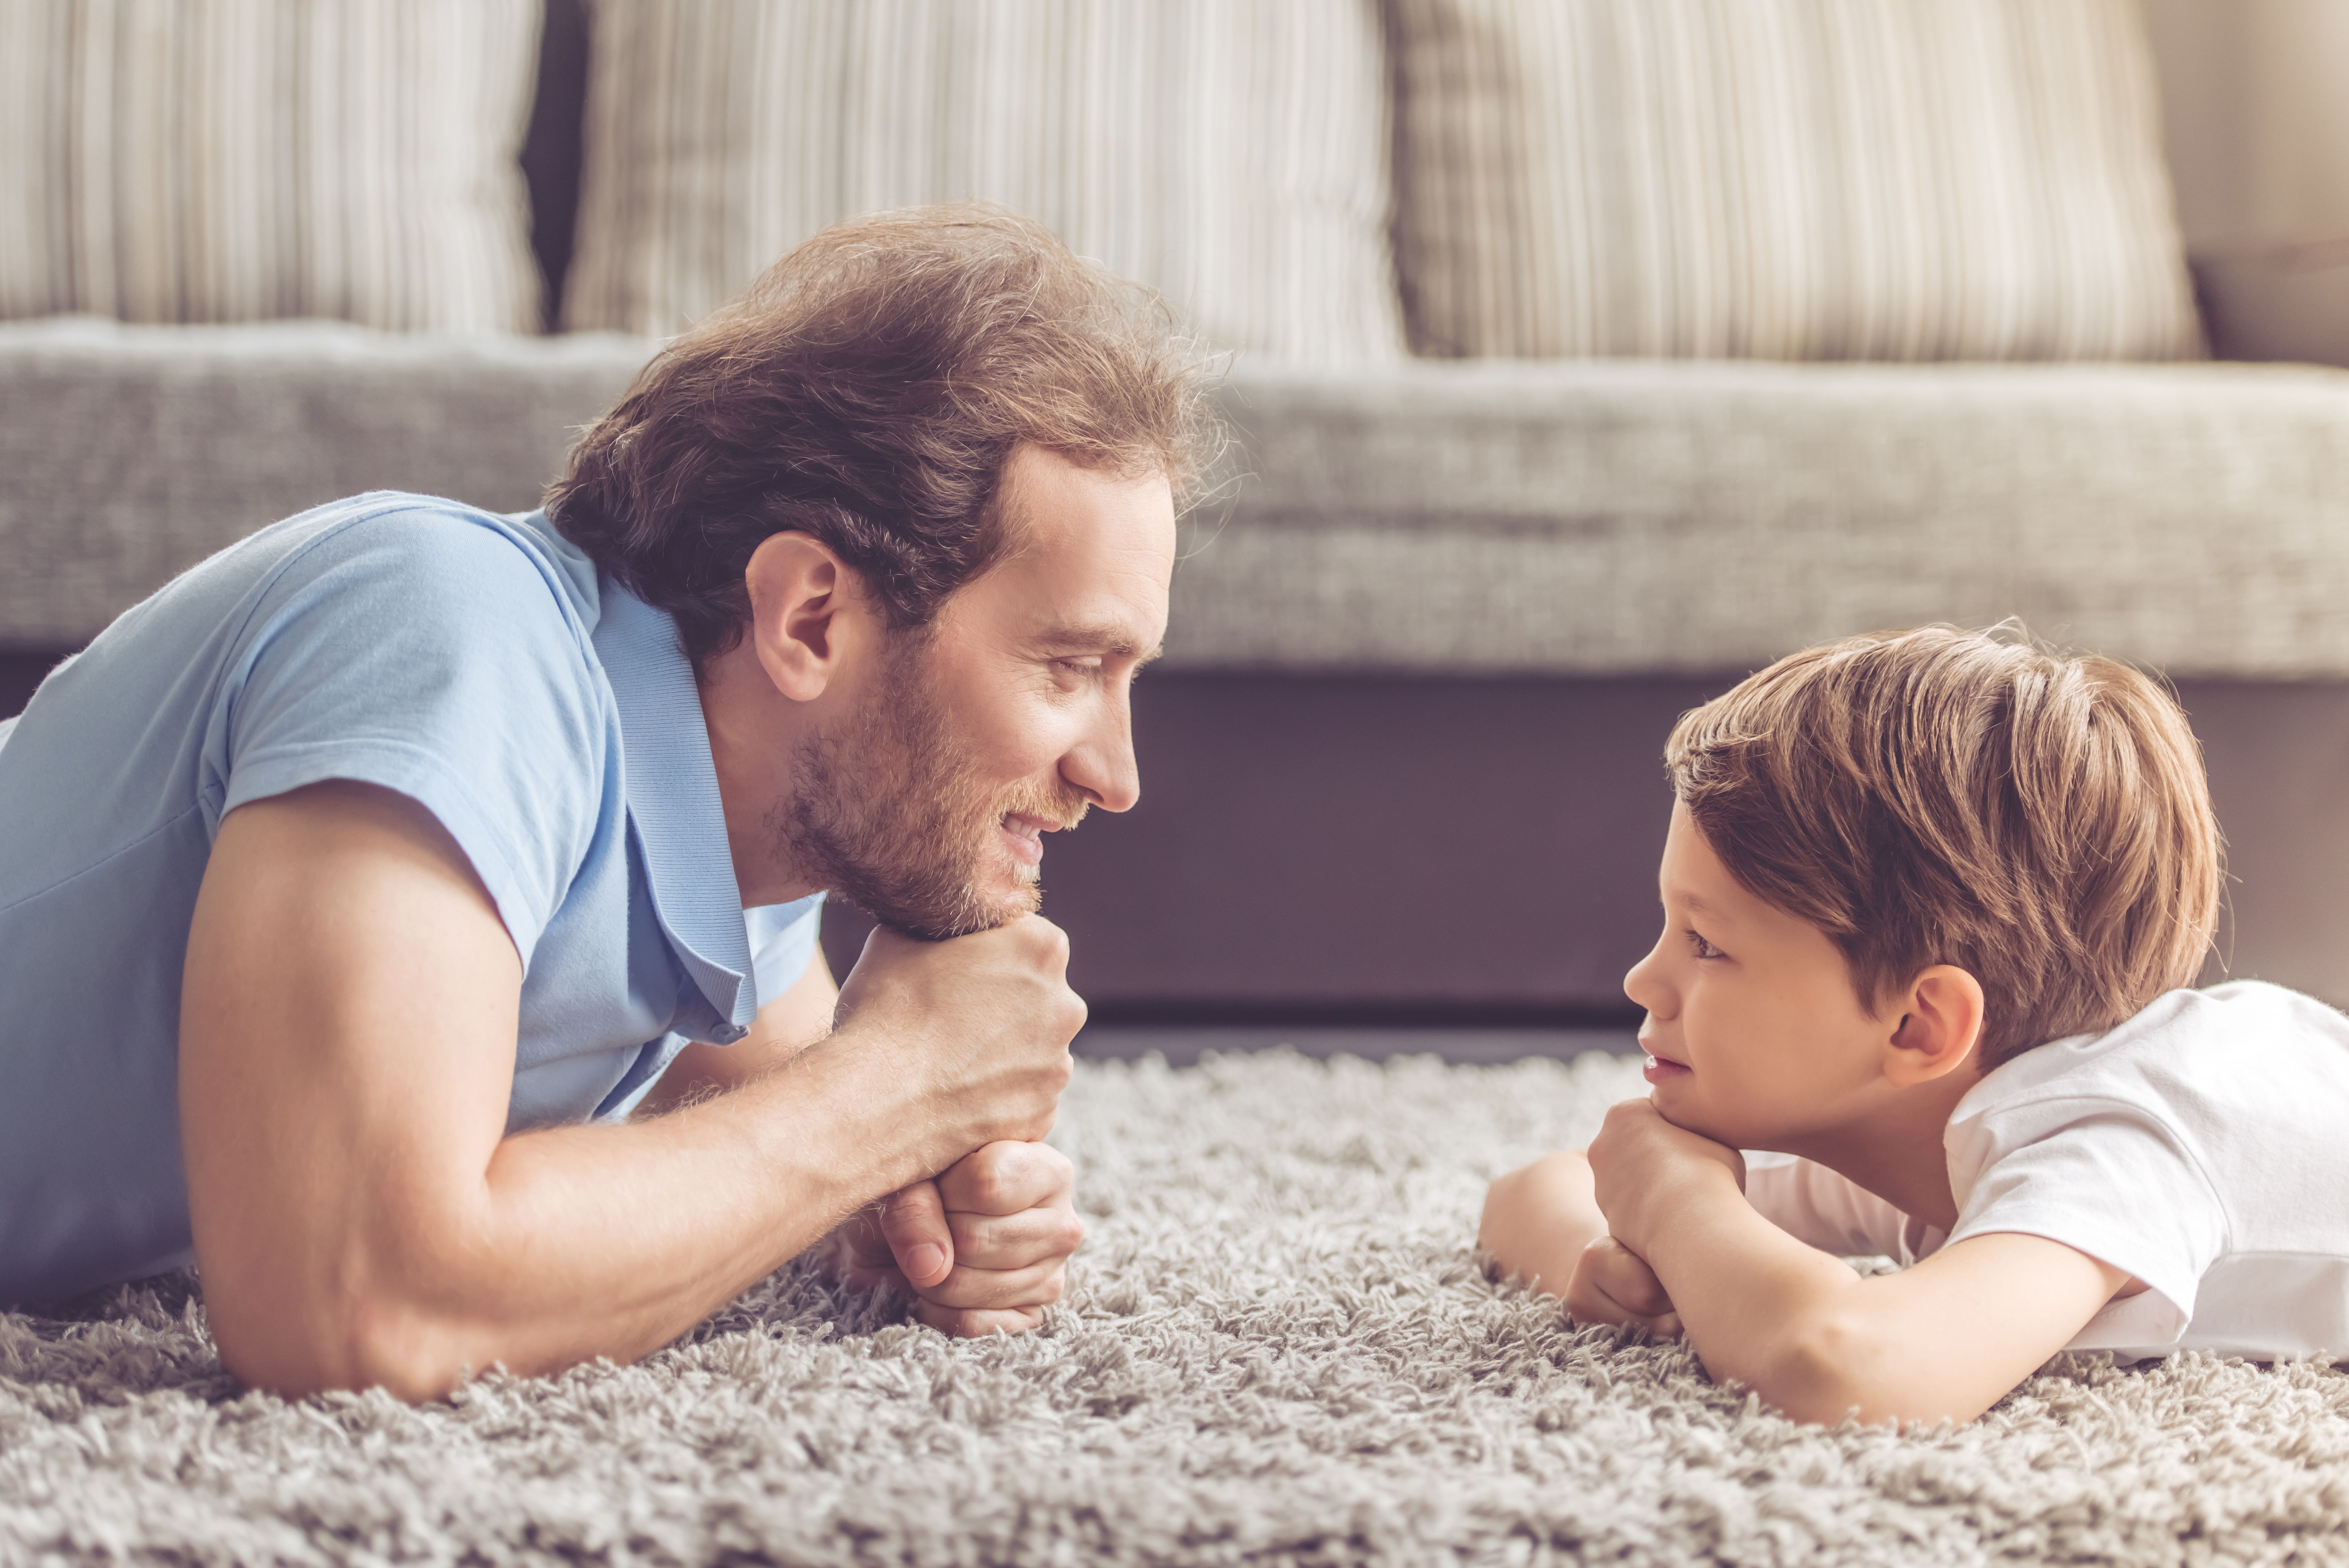 A father and son bonding at home. | Source: Shutterstock